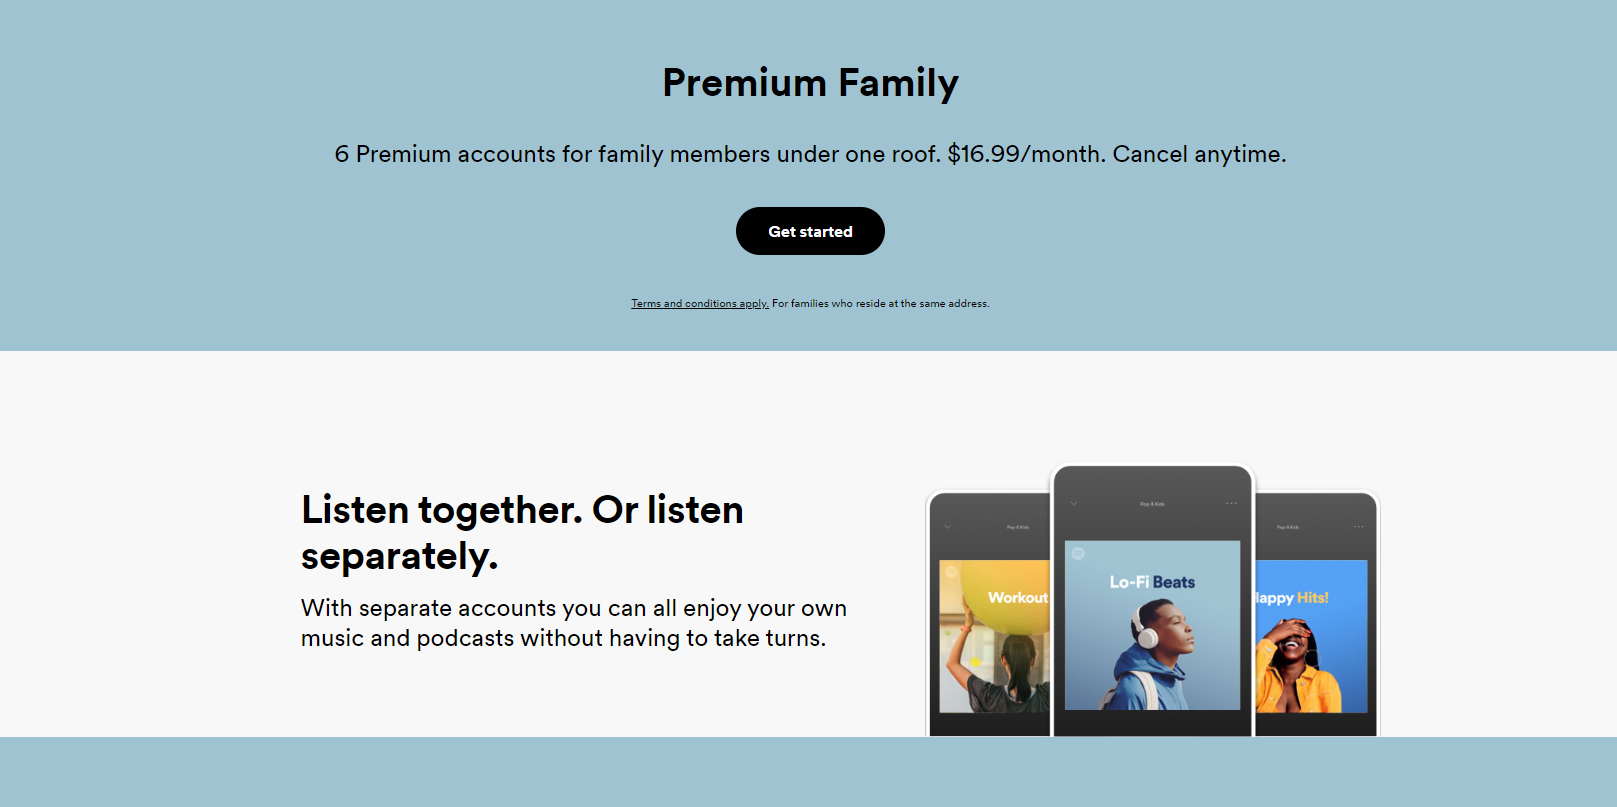 The Spotify Premium Family page on the Spotify website